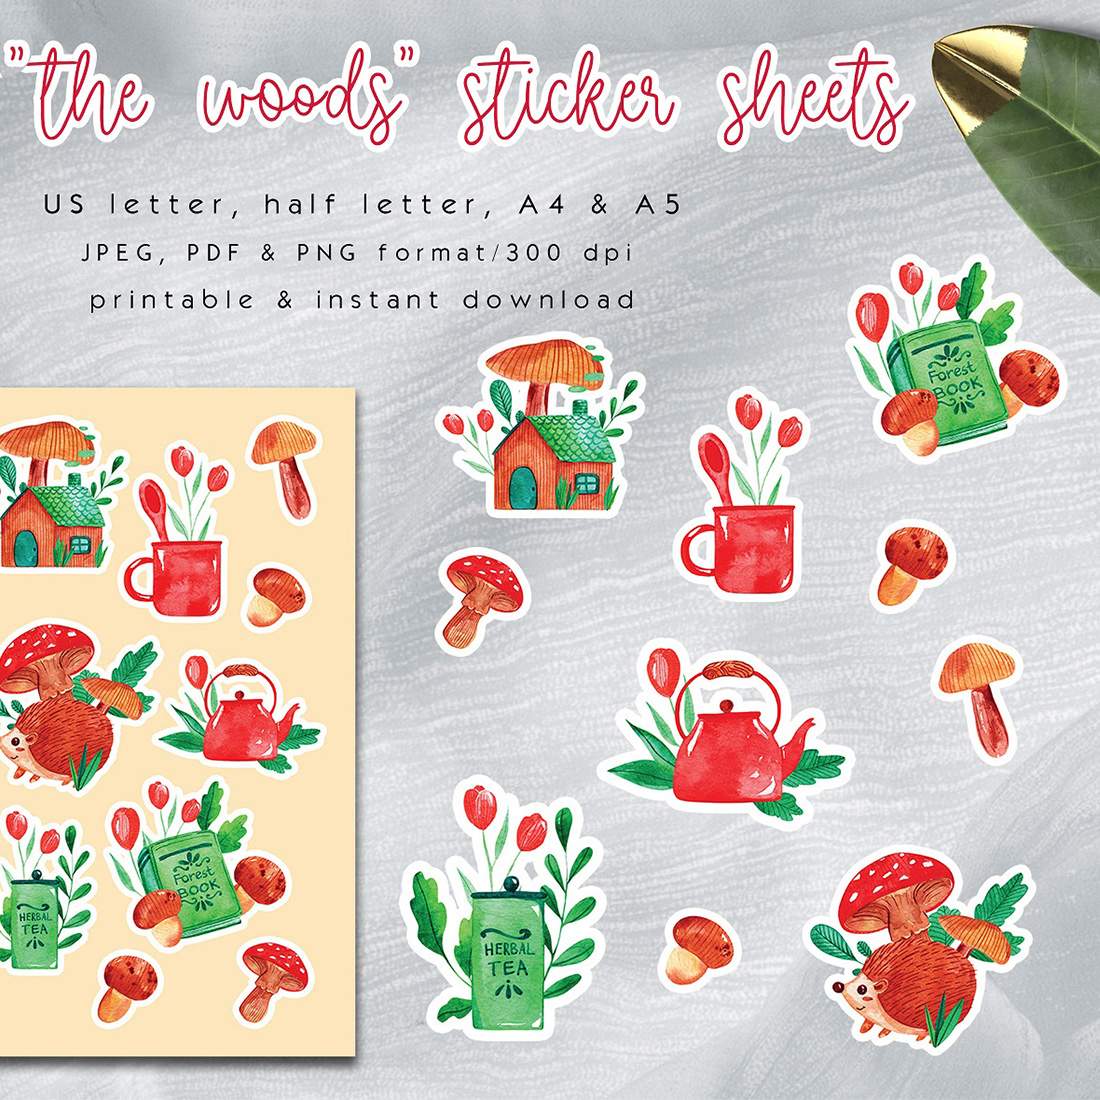 Cozy woodland cabin Sticker pack cover image.